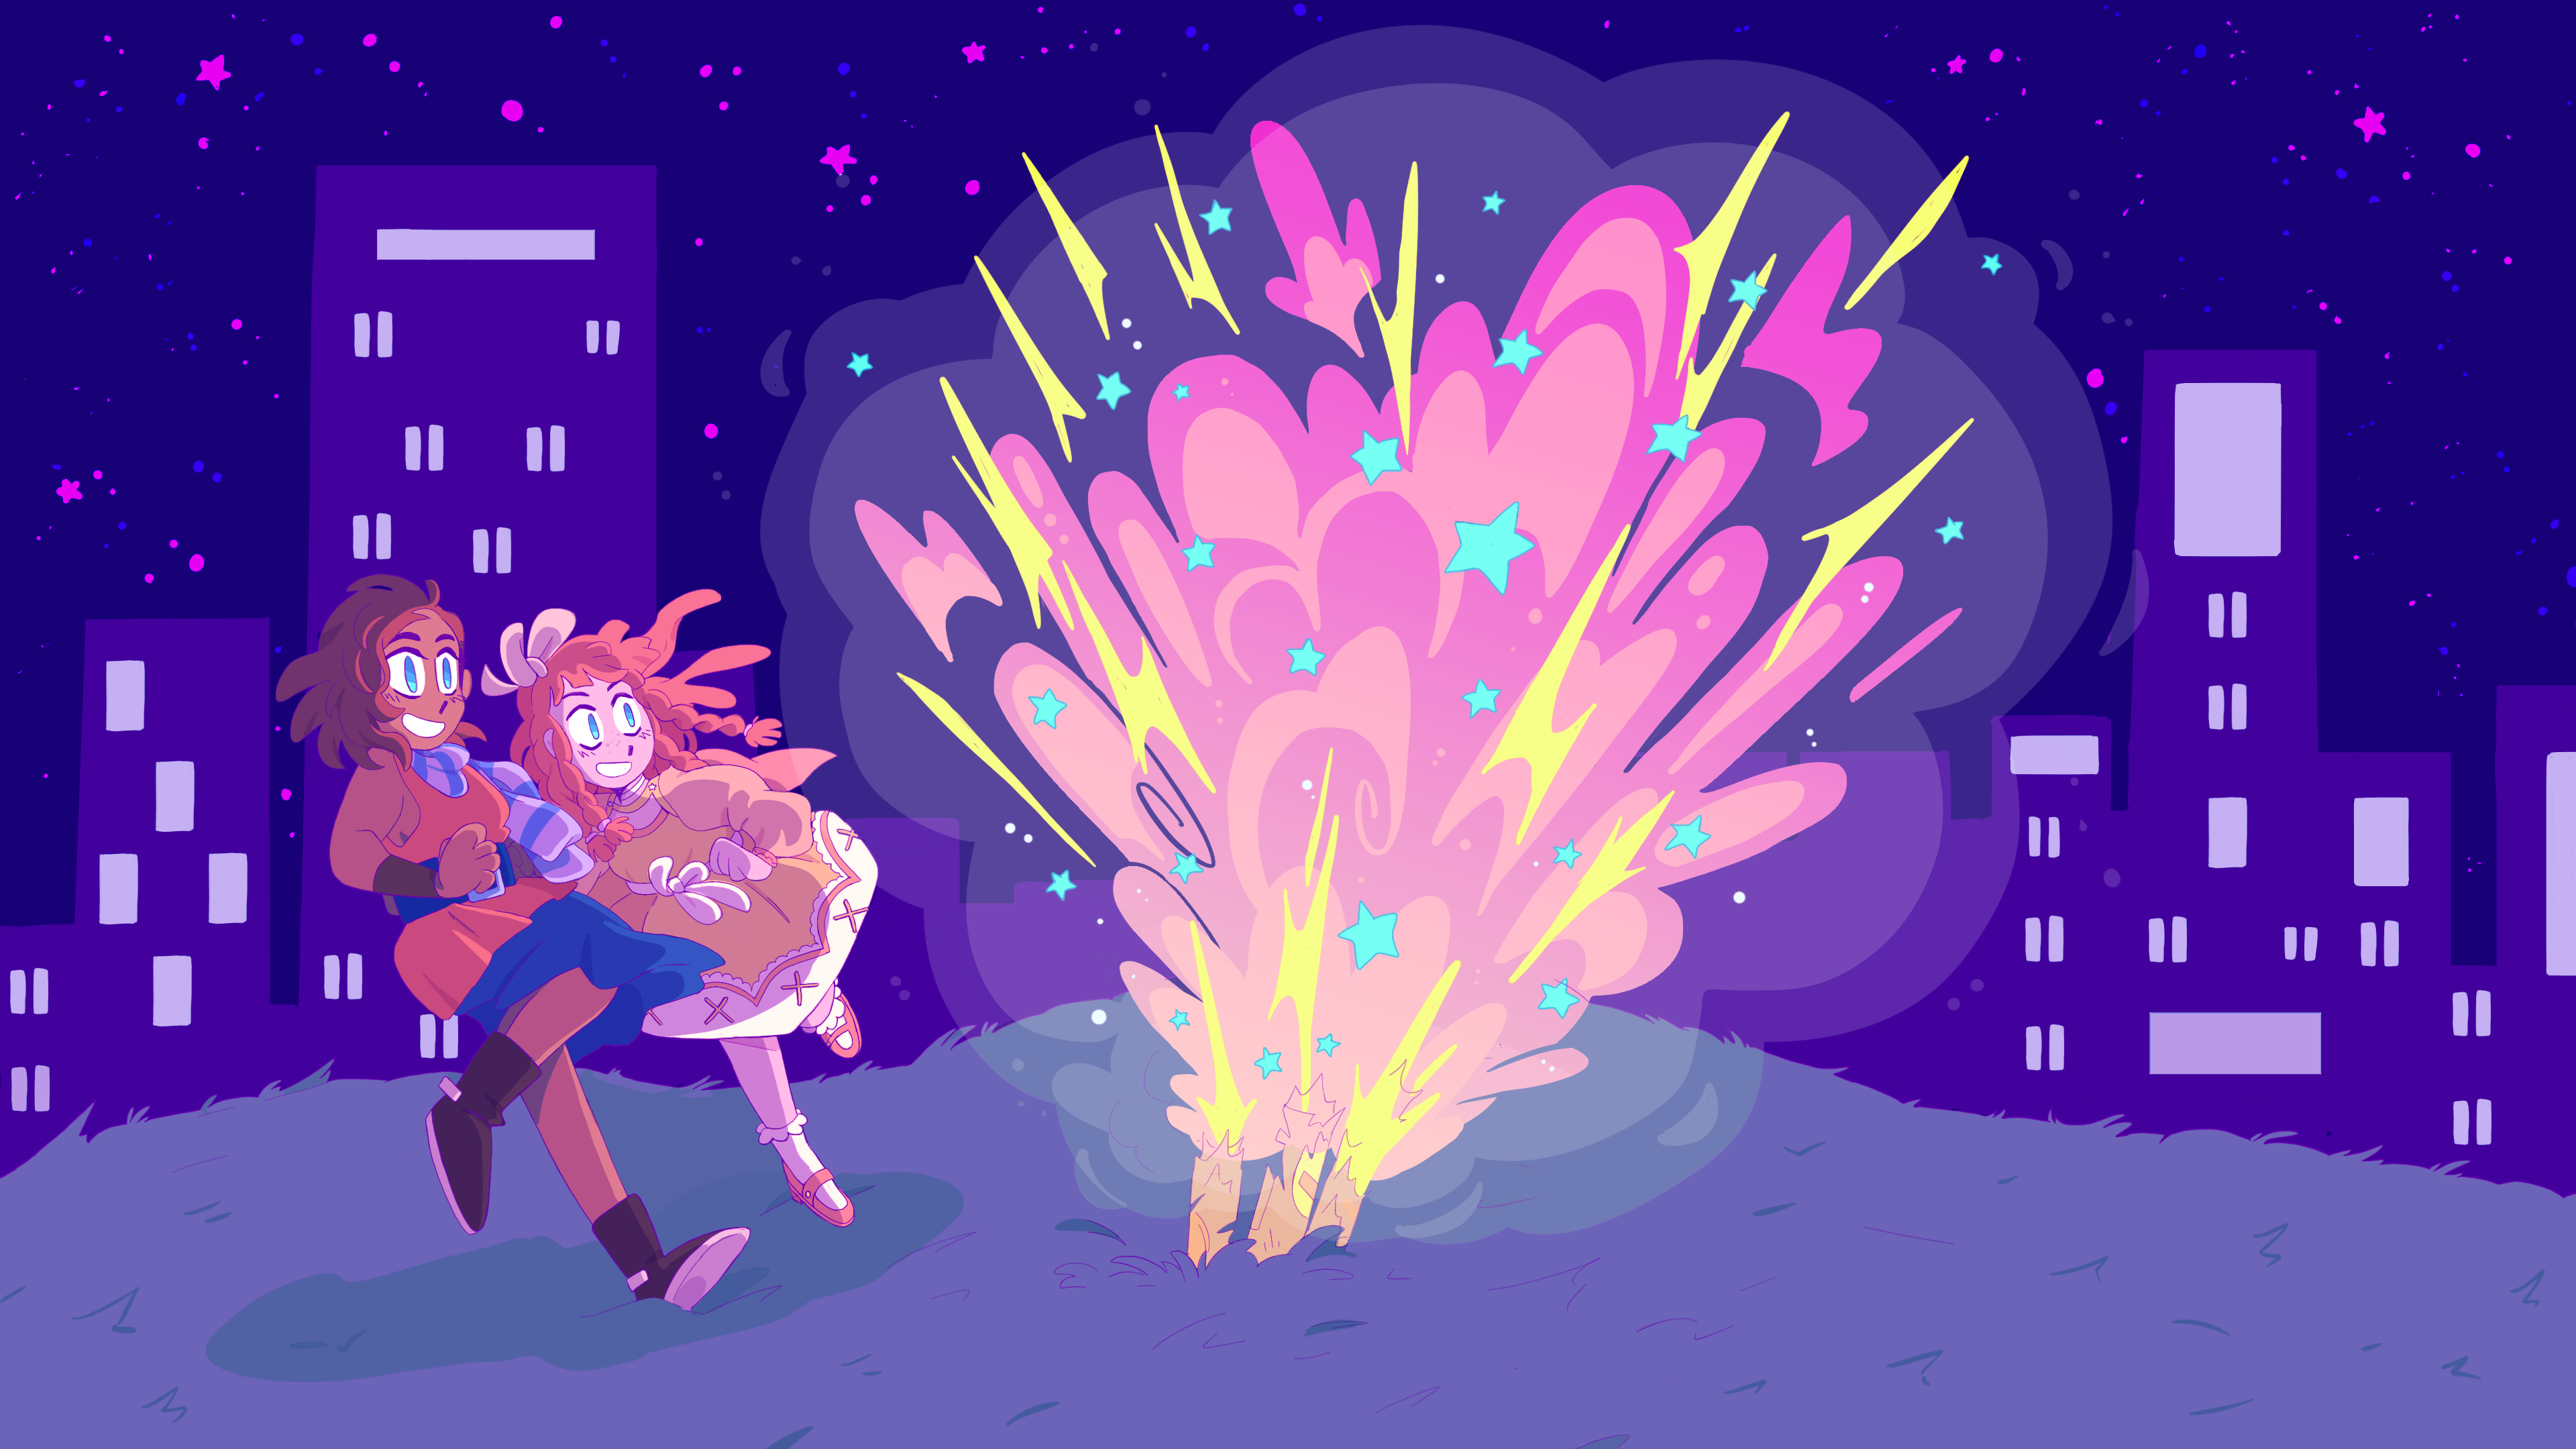 Illustration for Bossgame by Delta (Iasmin Omar Ata). Anna and Dawn laugh and smile outside during a purple nighttime scene just outside a city. Fireworks sticking into the ground explode into bright, colorful explosions of pink and yellow and blue.